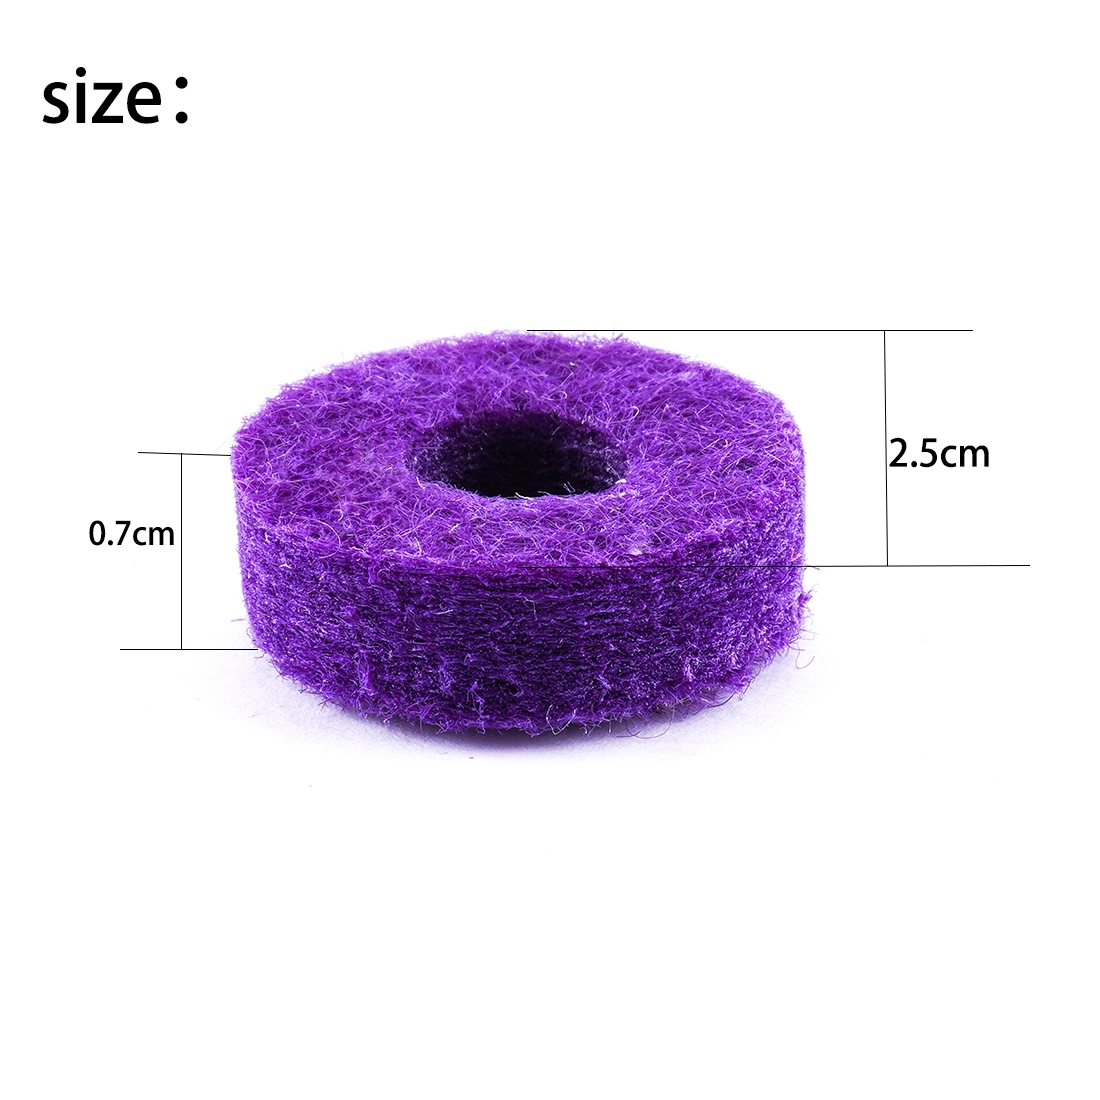 20pcs/set Round Soft For Drum Set Cymbal Stand Felt Washer Pad Replacement Cymbals Felt Pad Musical Instrument Accessories